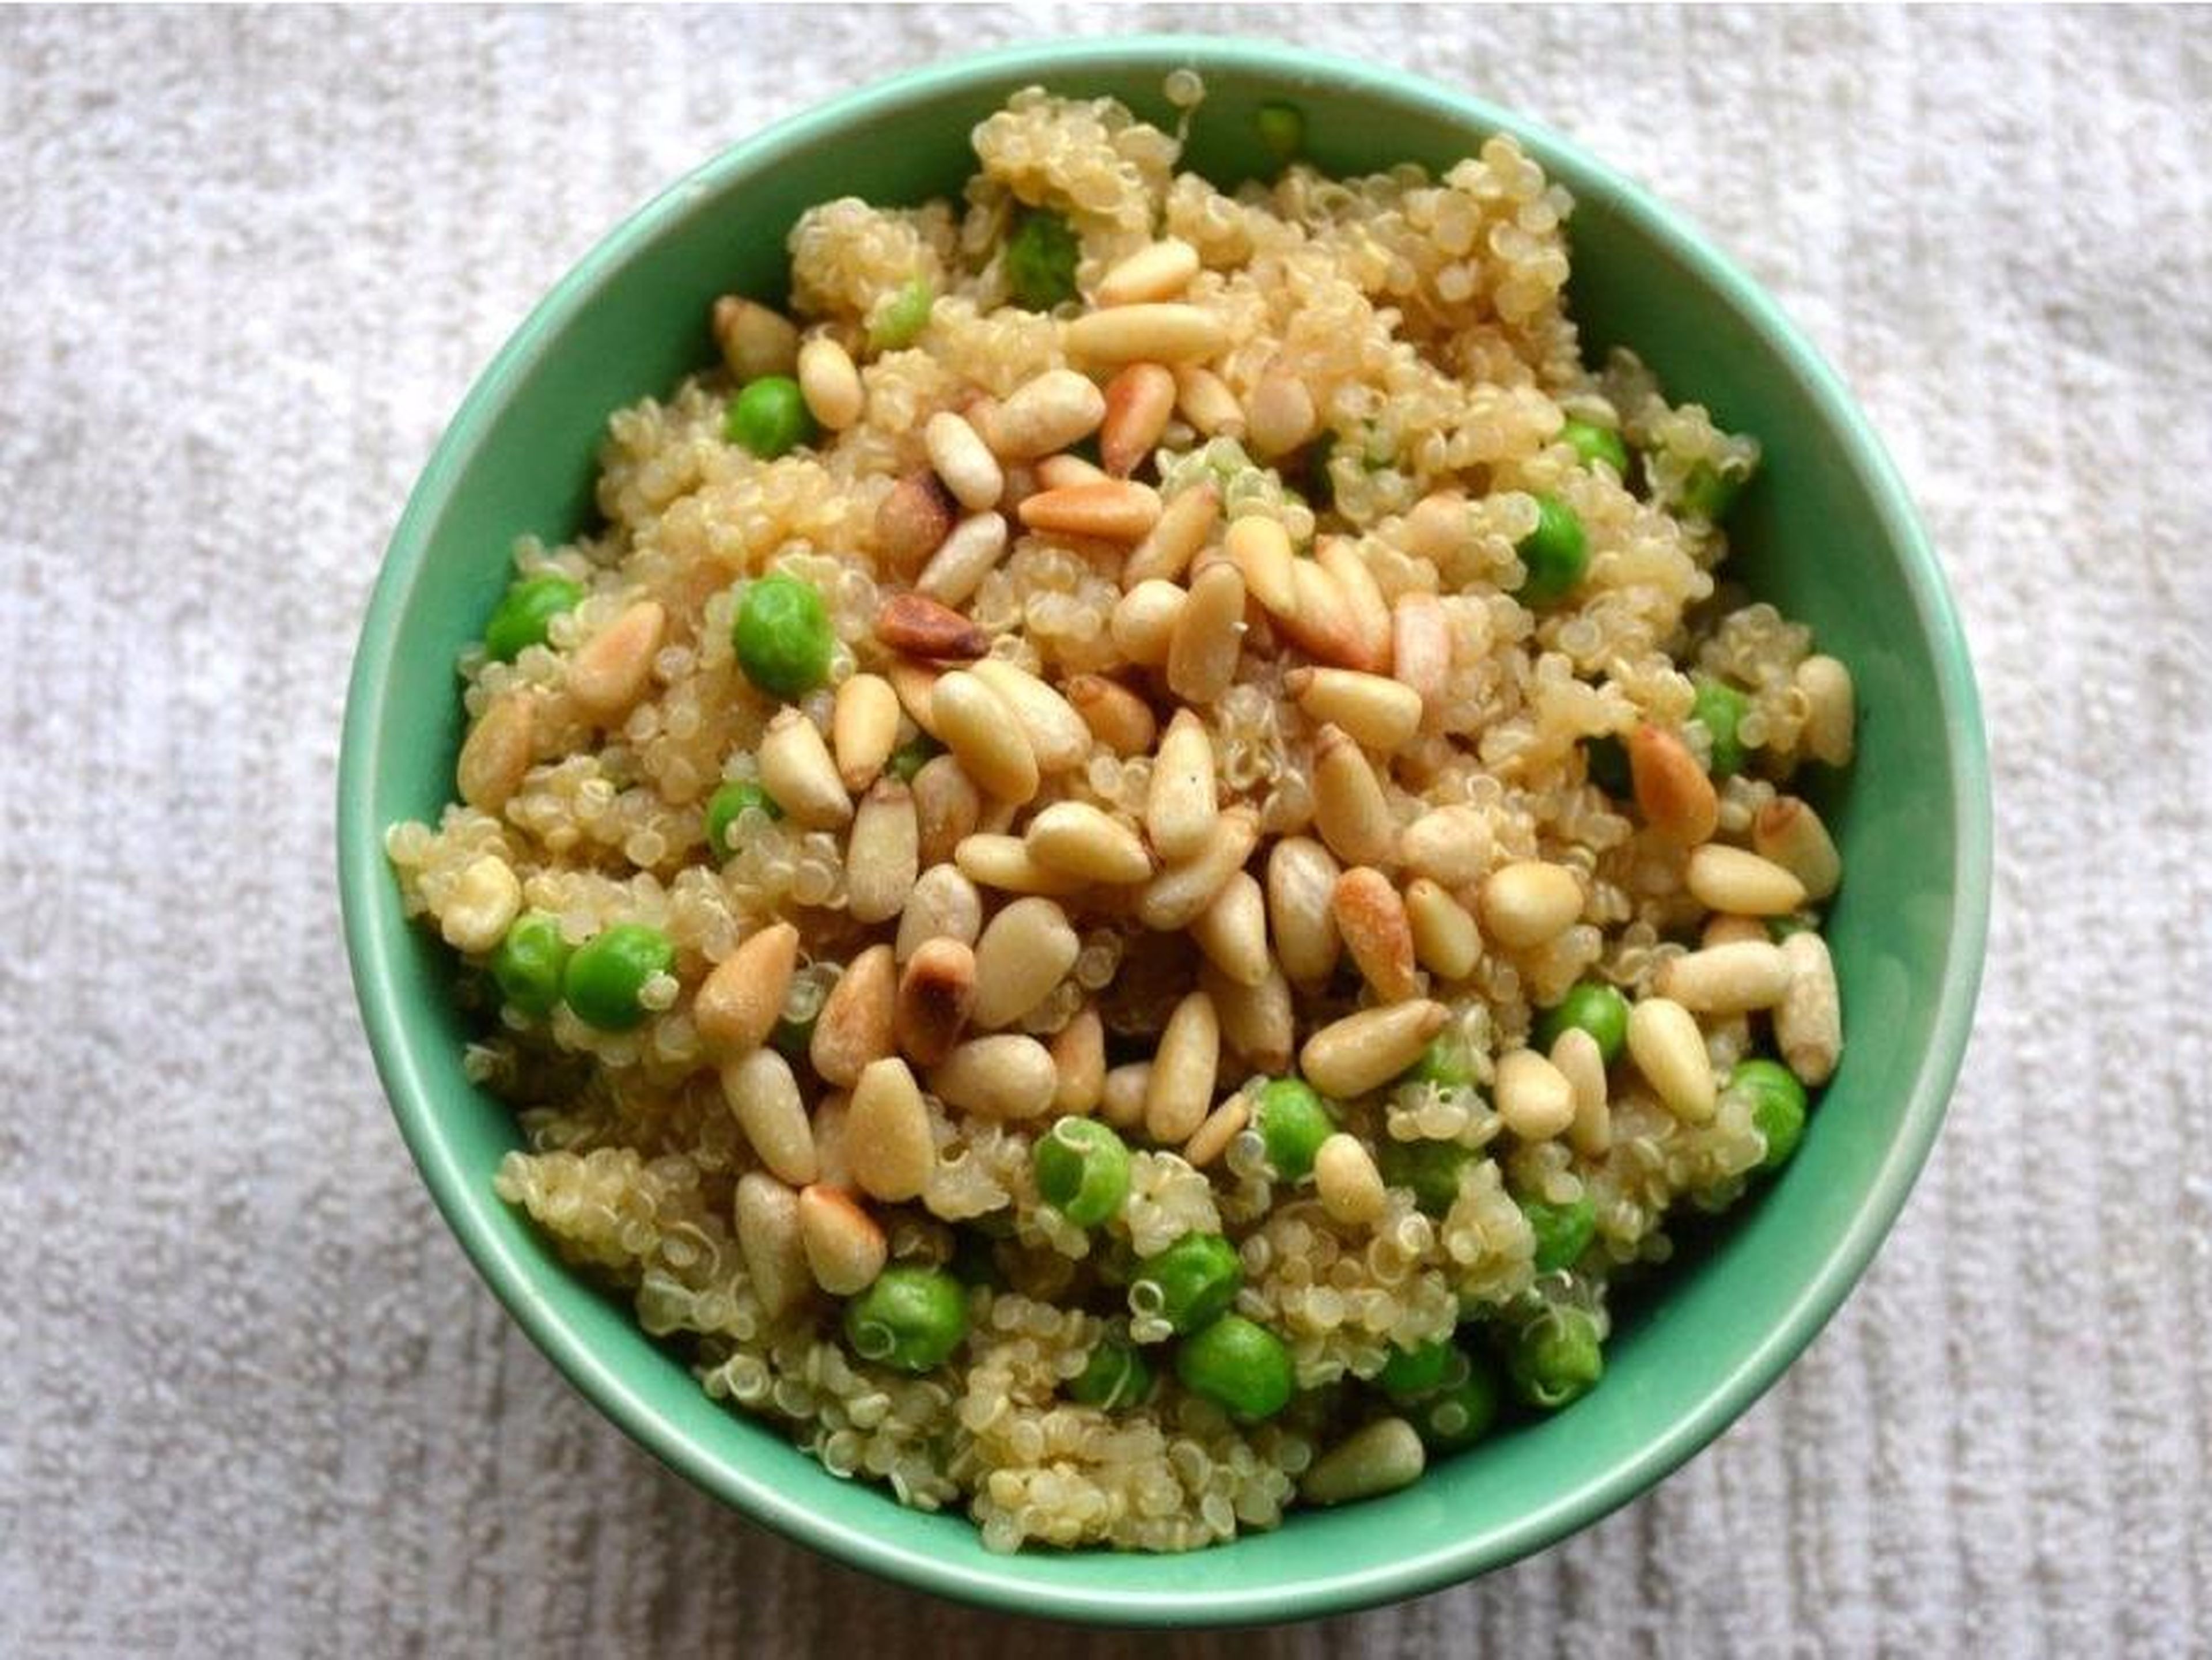 Quinoa and legumes are great sources of protein. They're higher in carbs than meat.